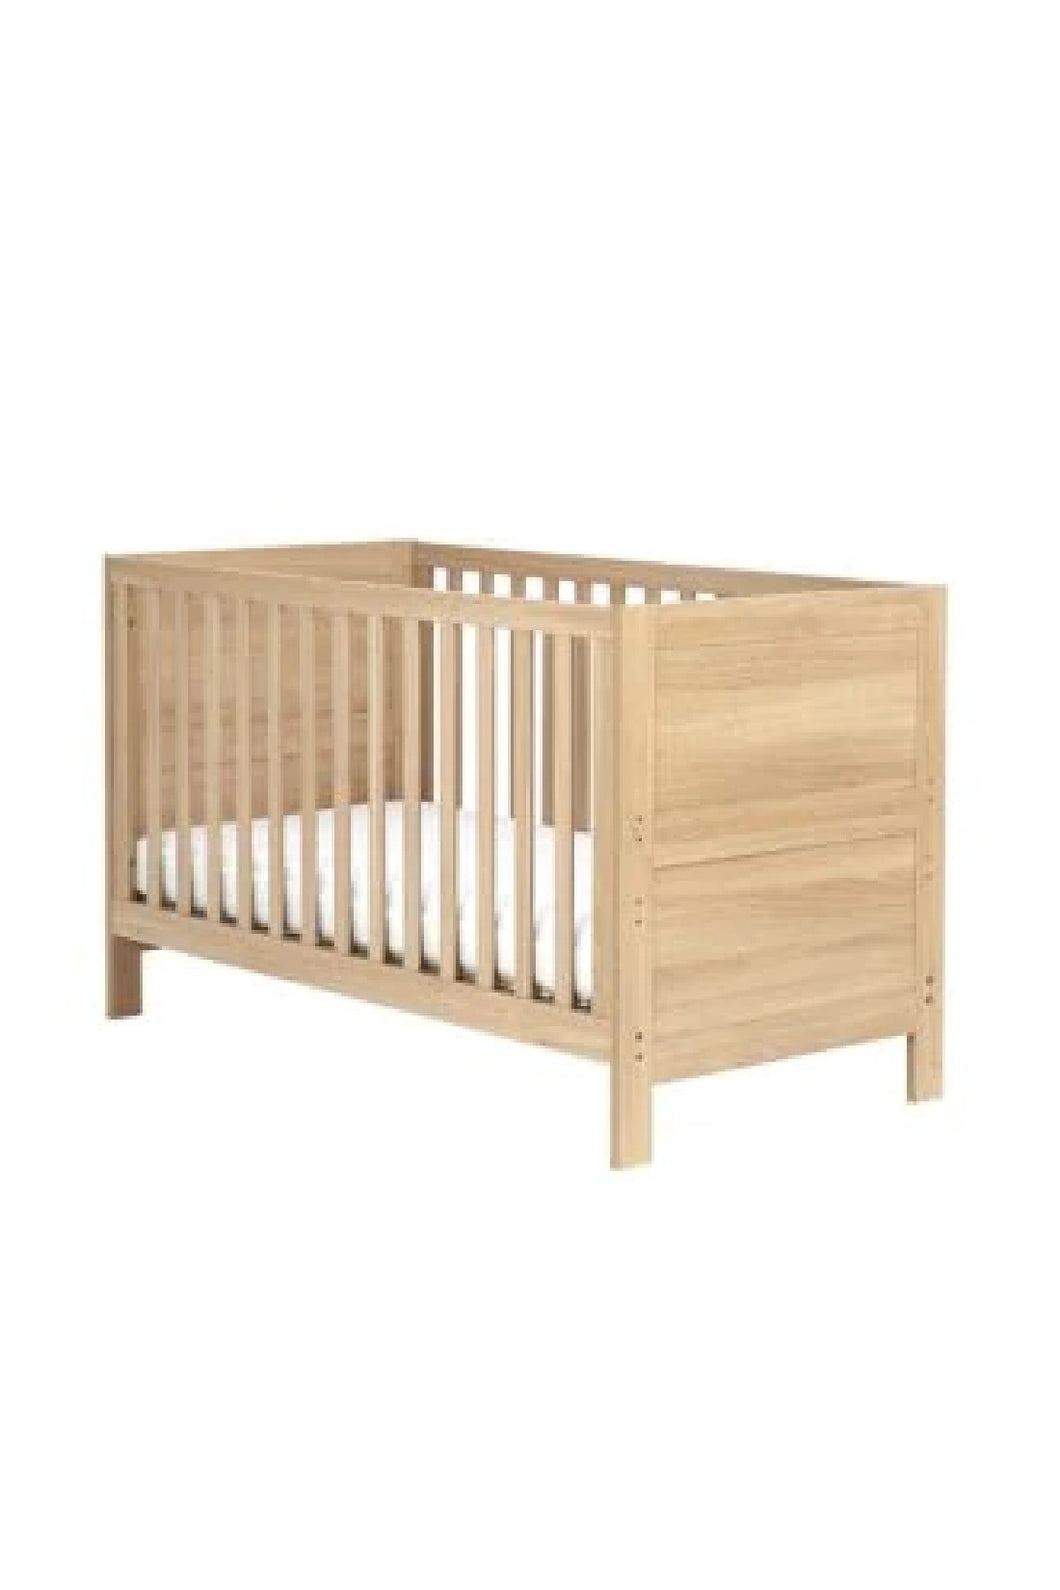 Mothercare Stretton Cot Bed 2